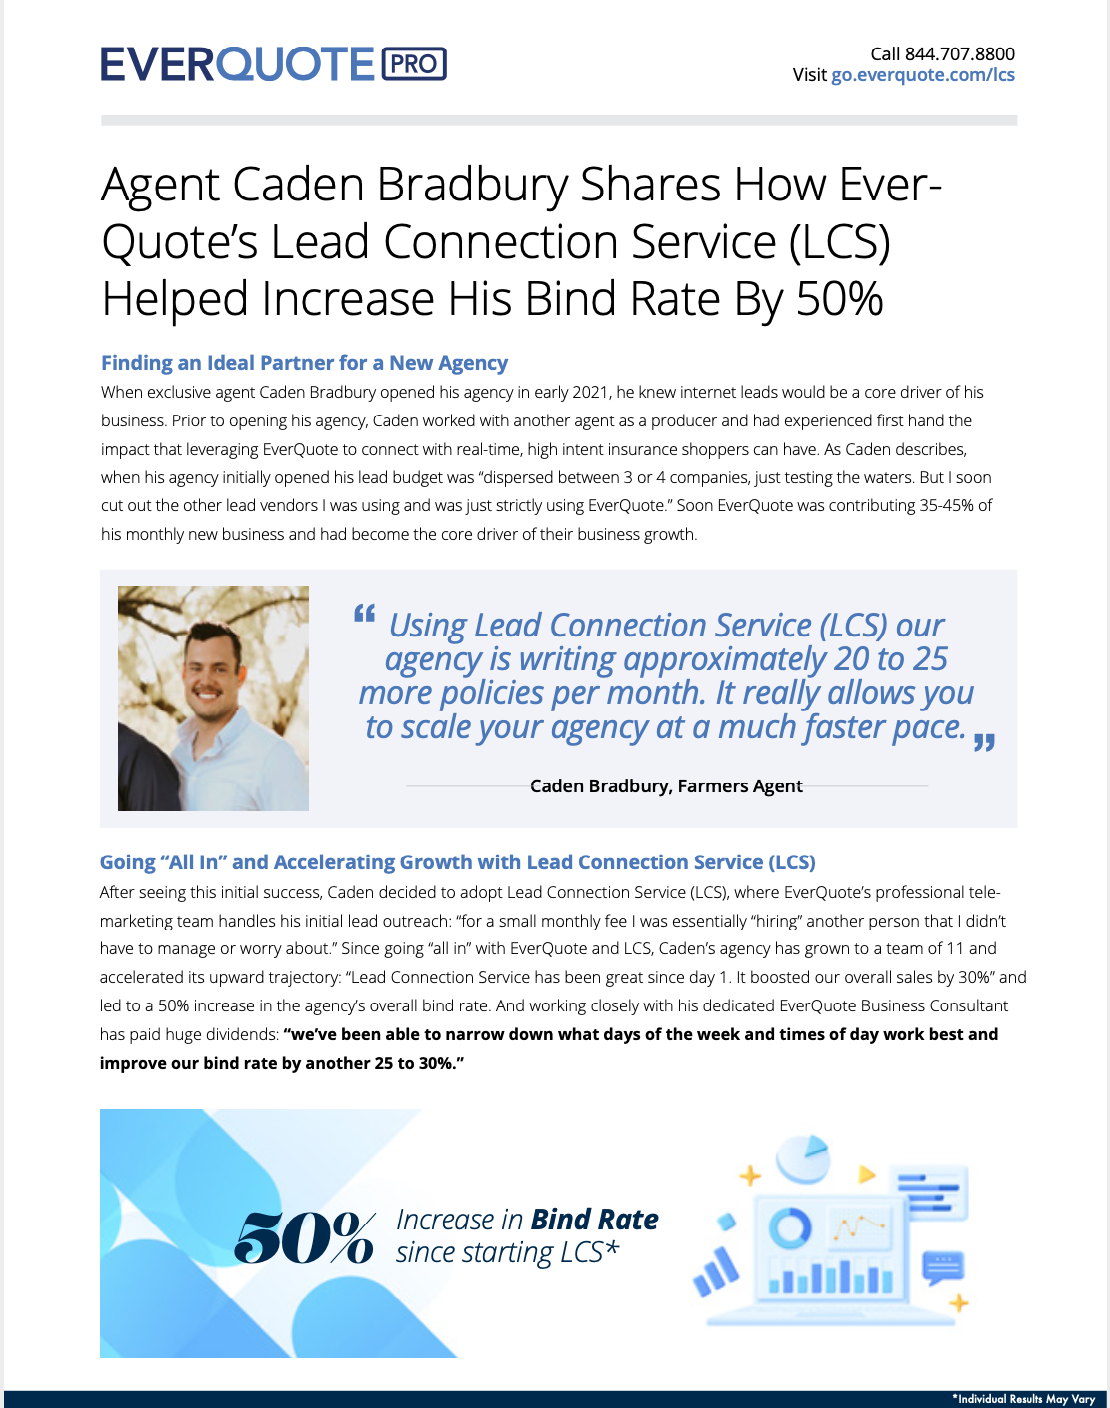 See How This Agent Increased His Bind Rate By 50% With EverQuote’s Lead Connection Service (LCS)